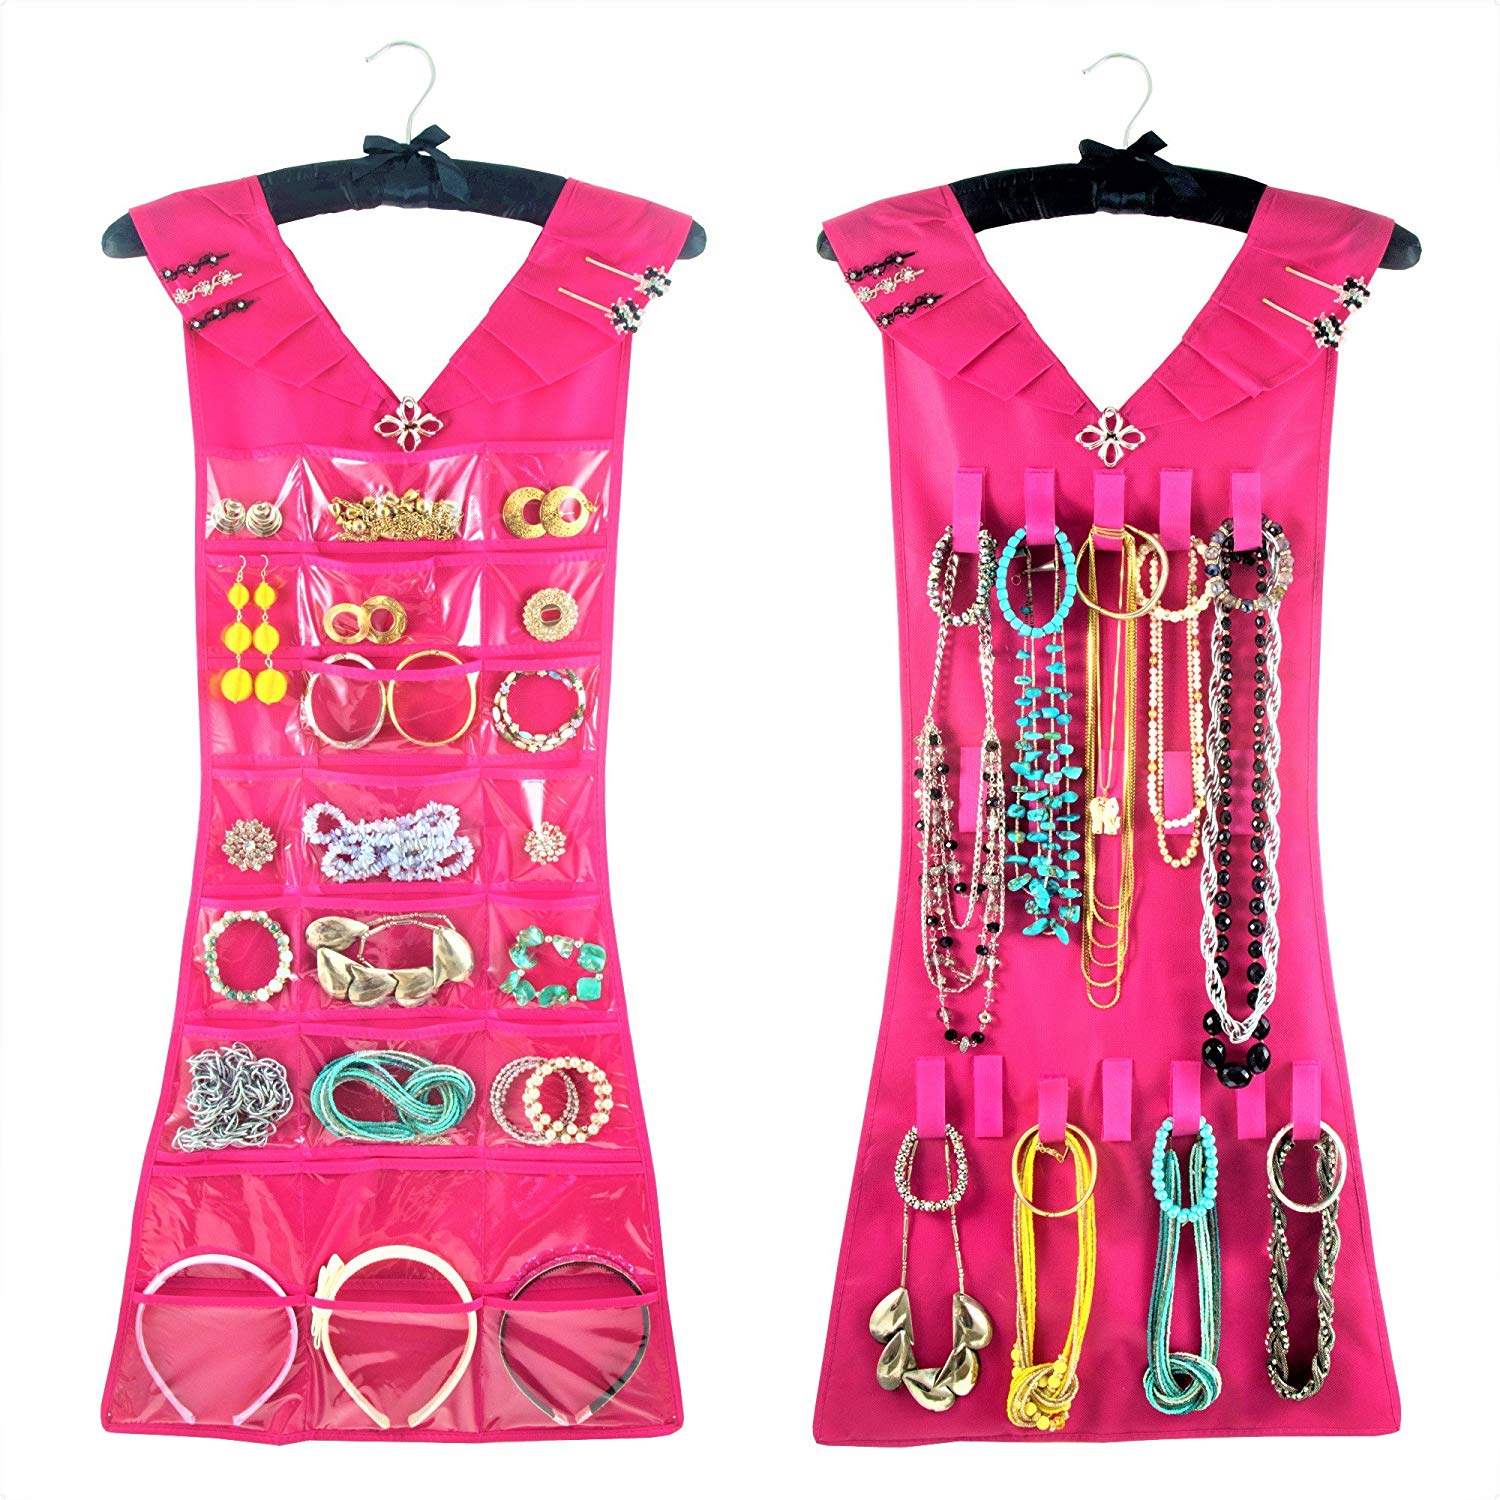 Hanging Jewelry Organizer, Closet Storage with Satin Hanger, 2 Sided for Jewelry, Hair Accessories & Makeup (1-Pink Dress & Black Satin Hanger, 24 Pockets 17 Hooks)